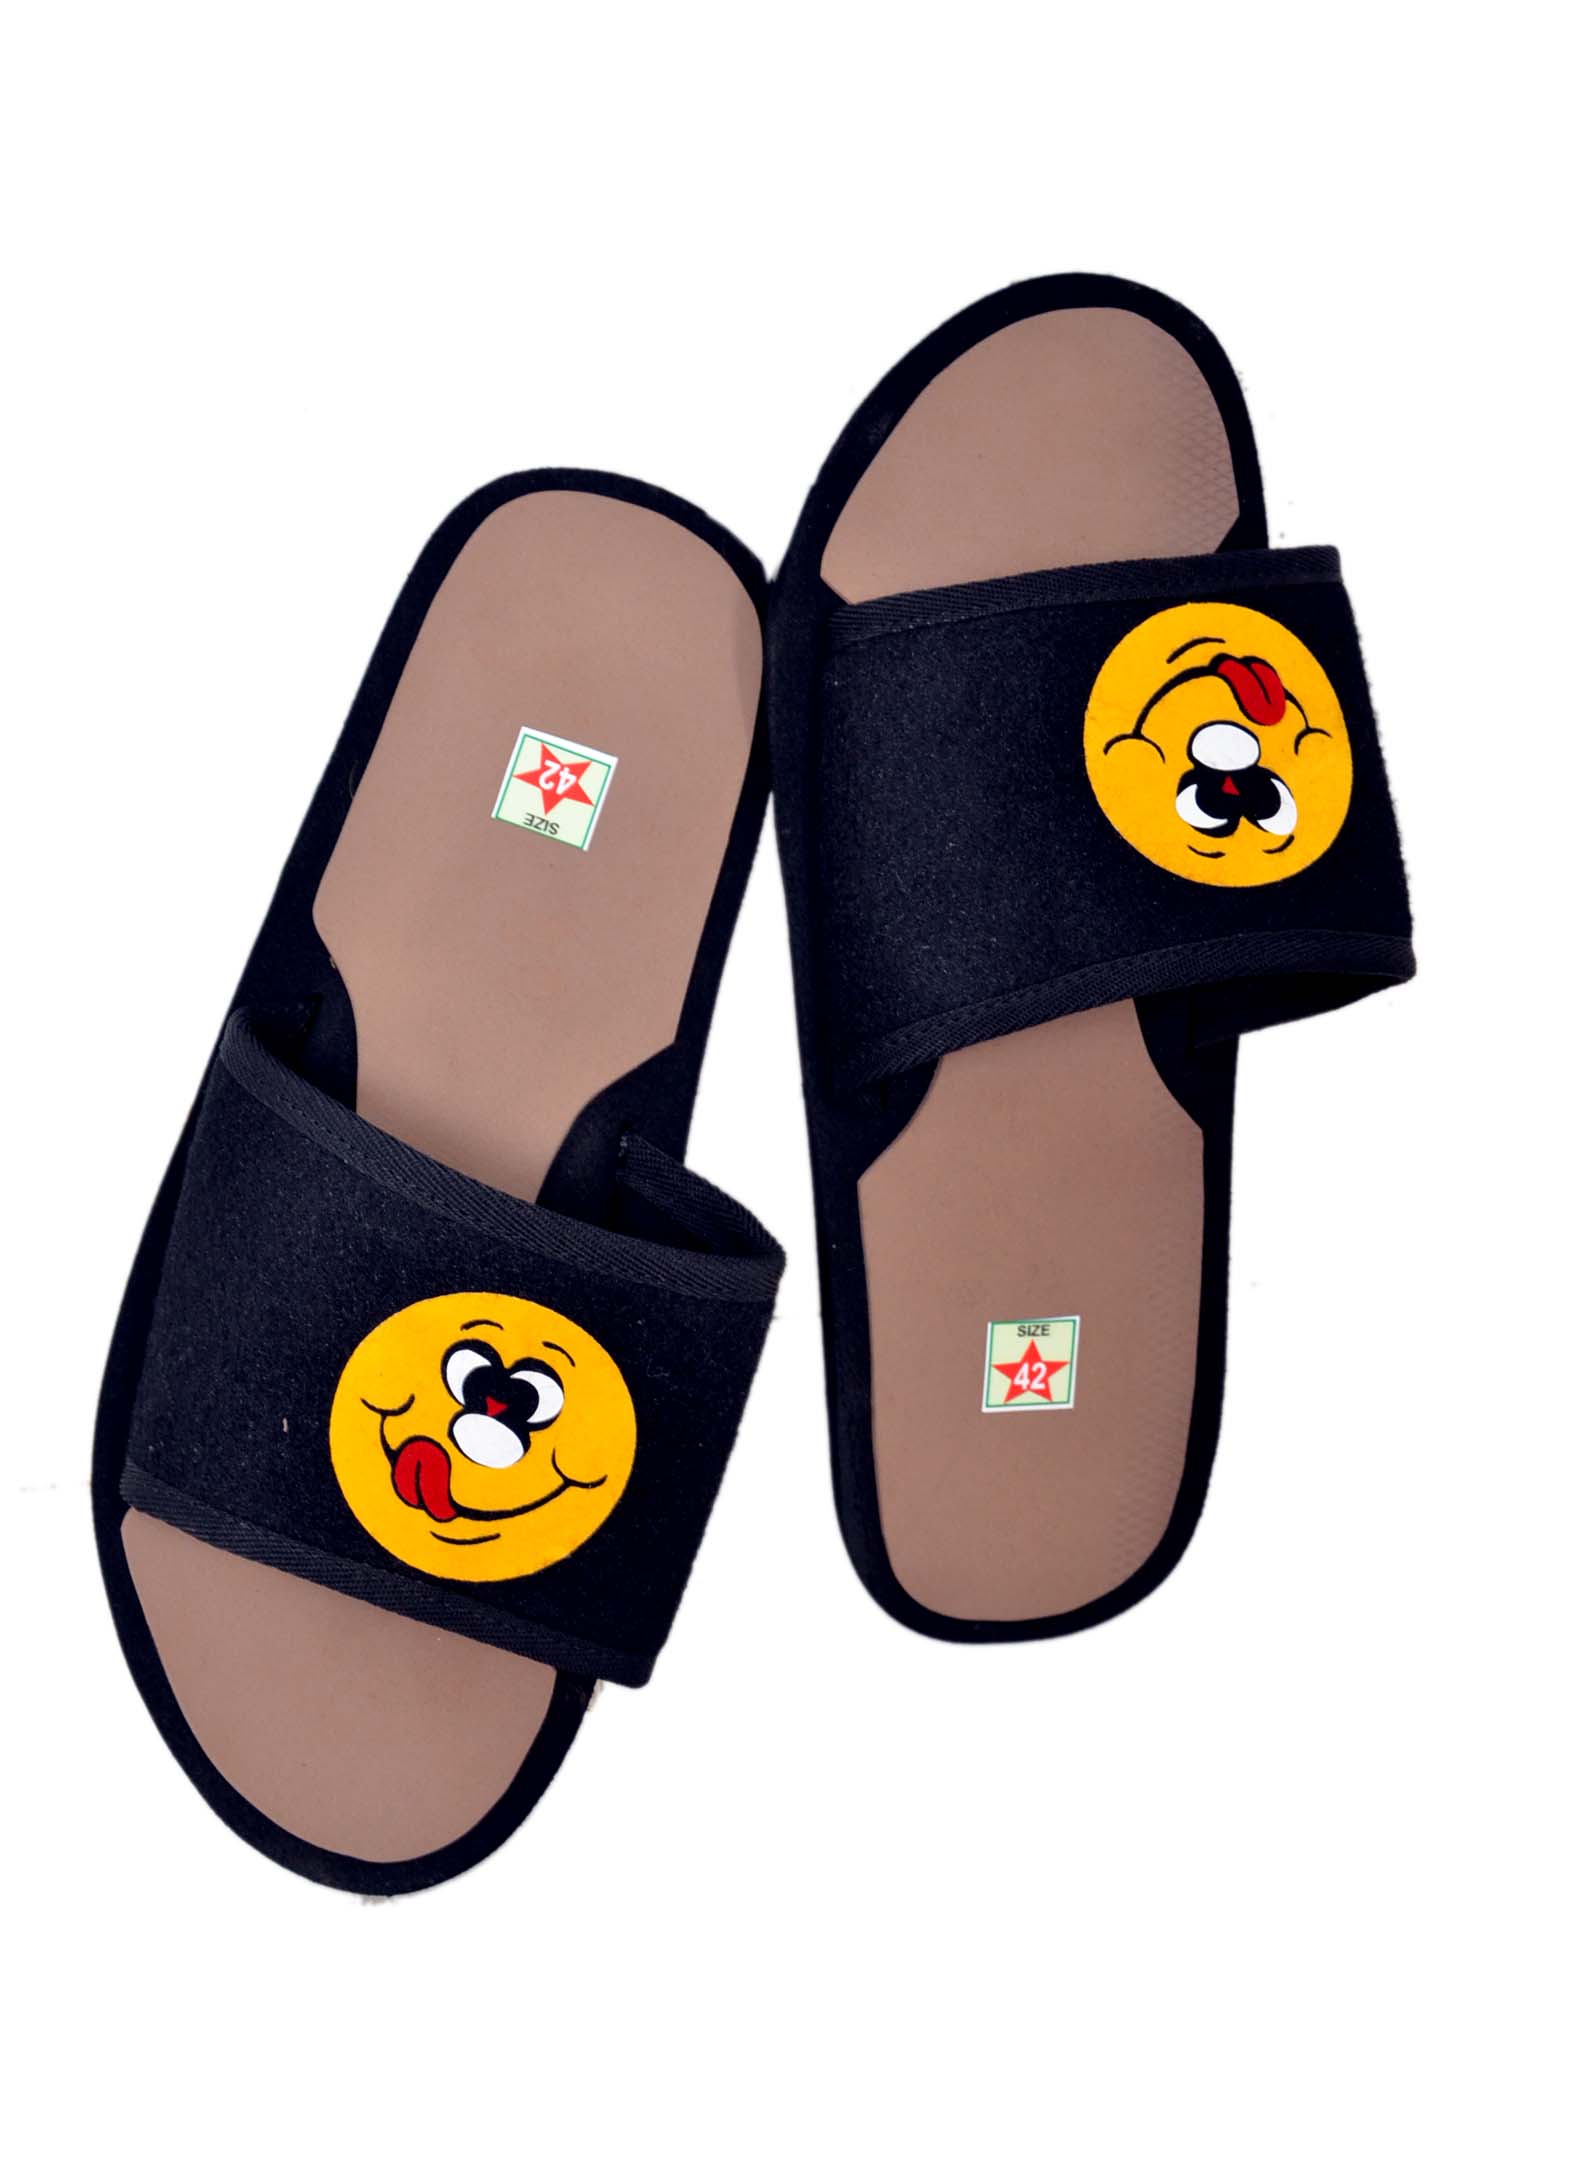 Check This Out,i Call It Smiley Foot - Fashion - Nigeria